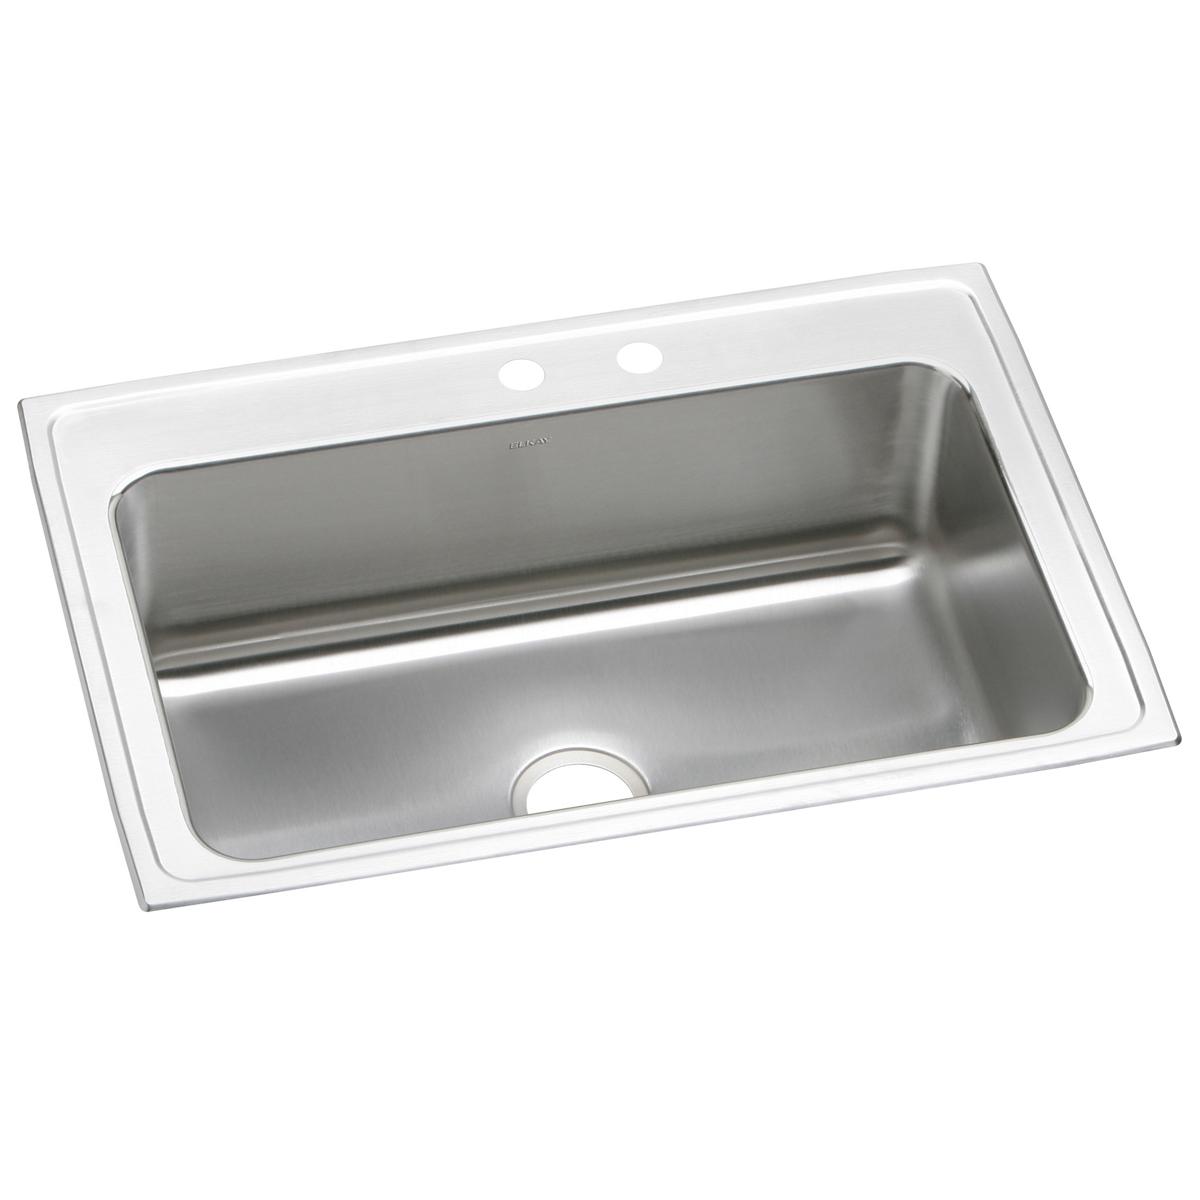 Elkay Lustertone Classic 33" x 22" x 10-1/8" Single Bowl Drop-in Sink with Quick-clip